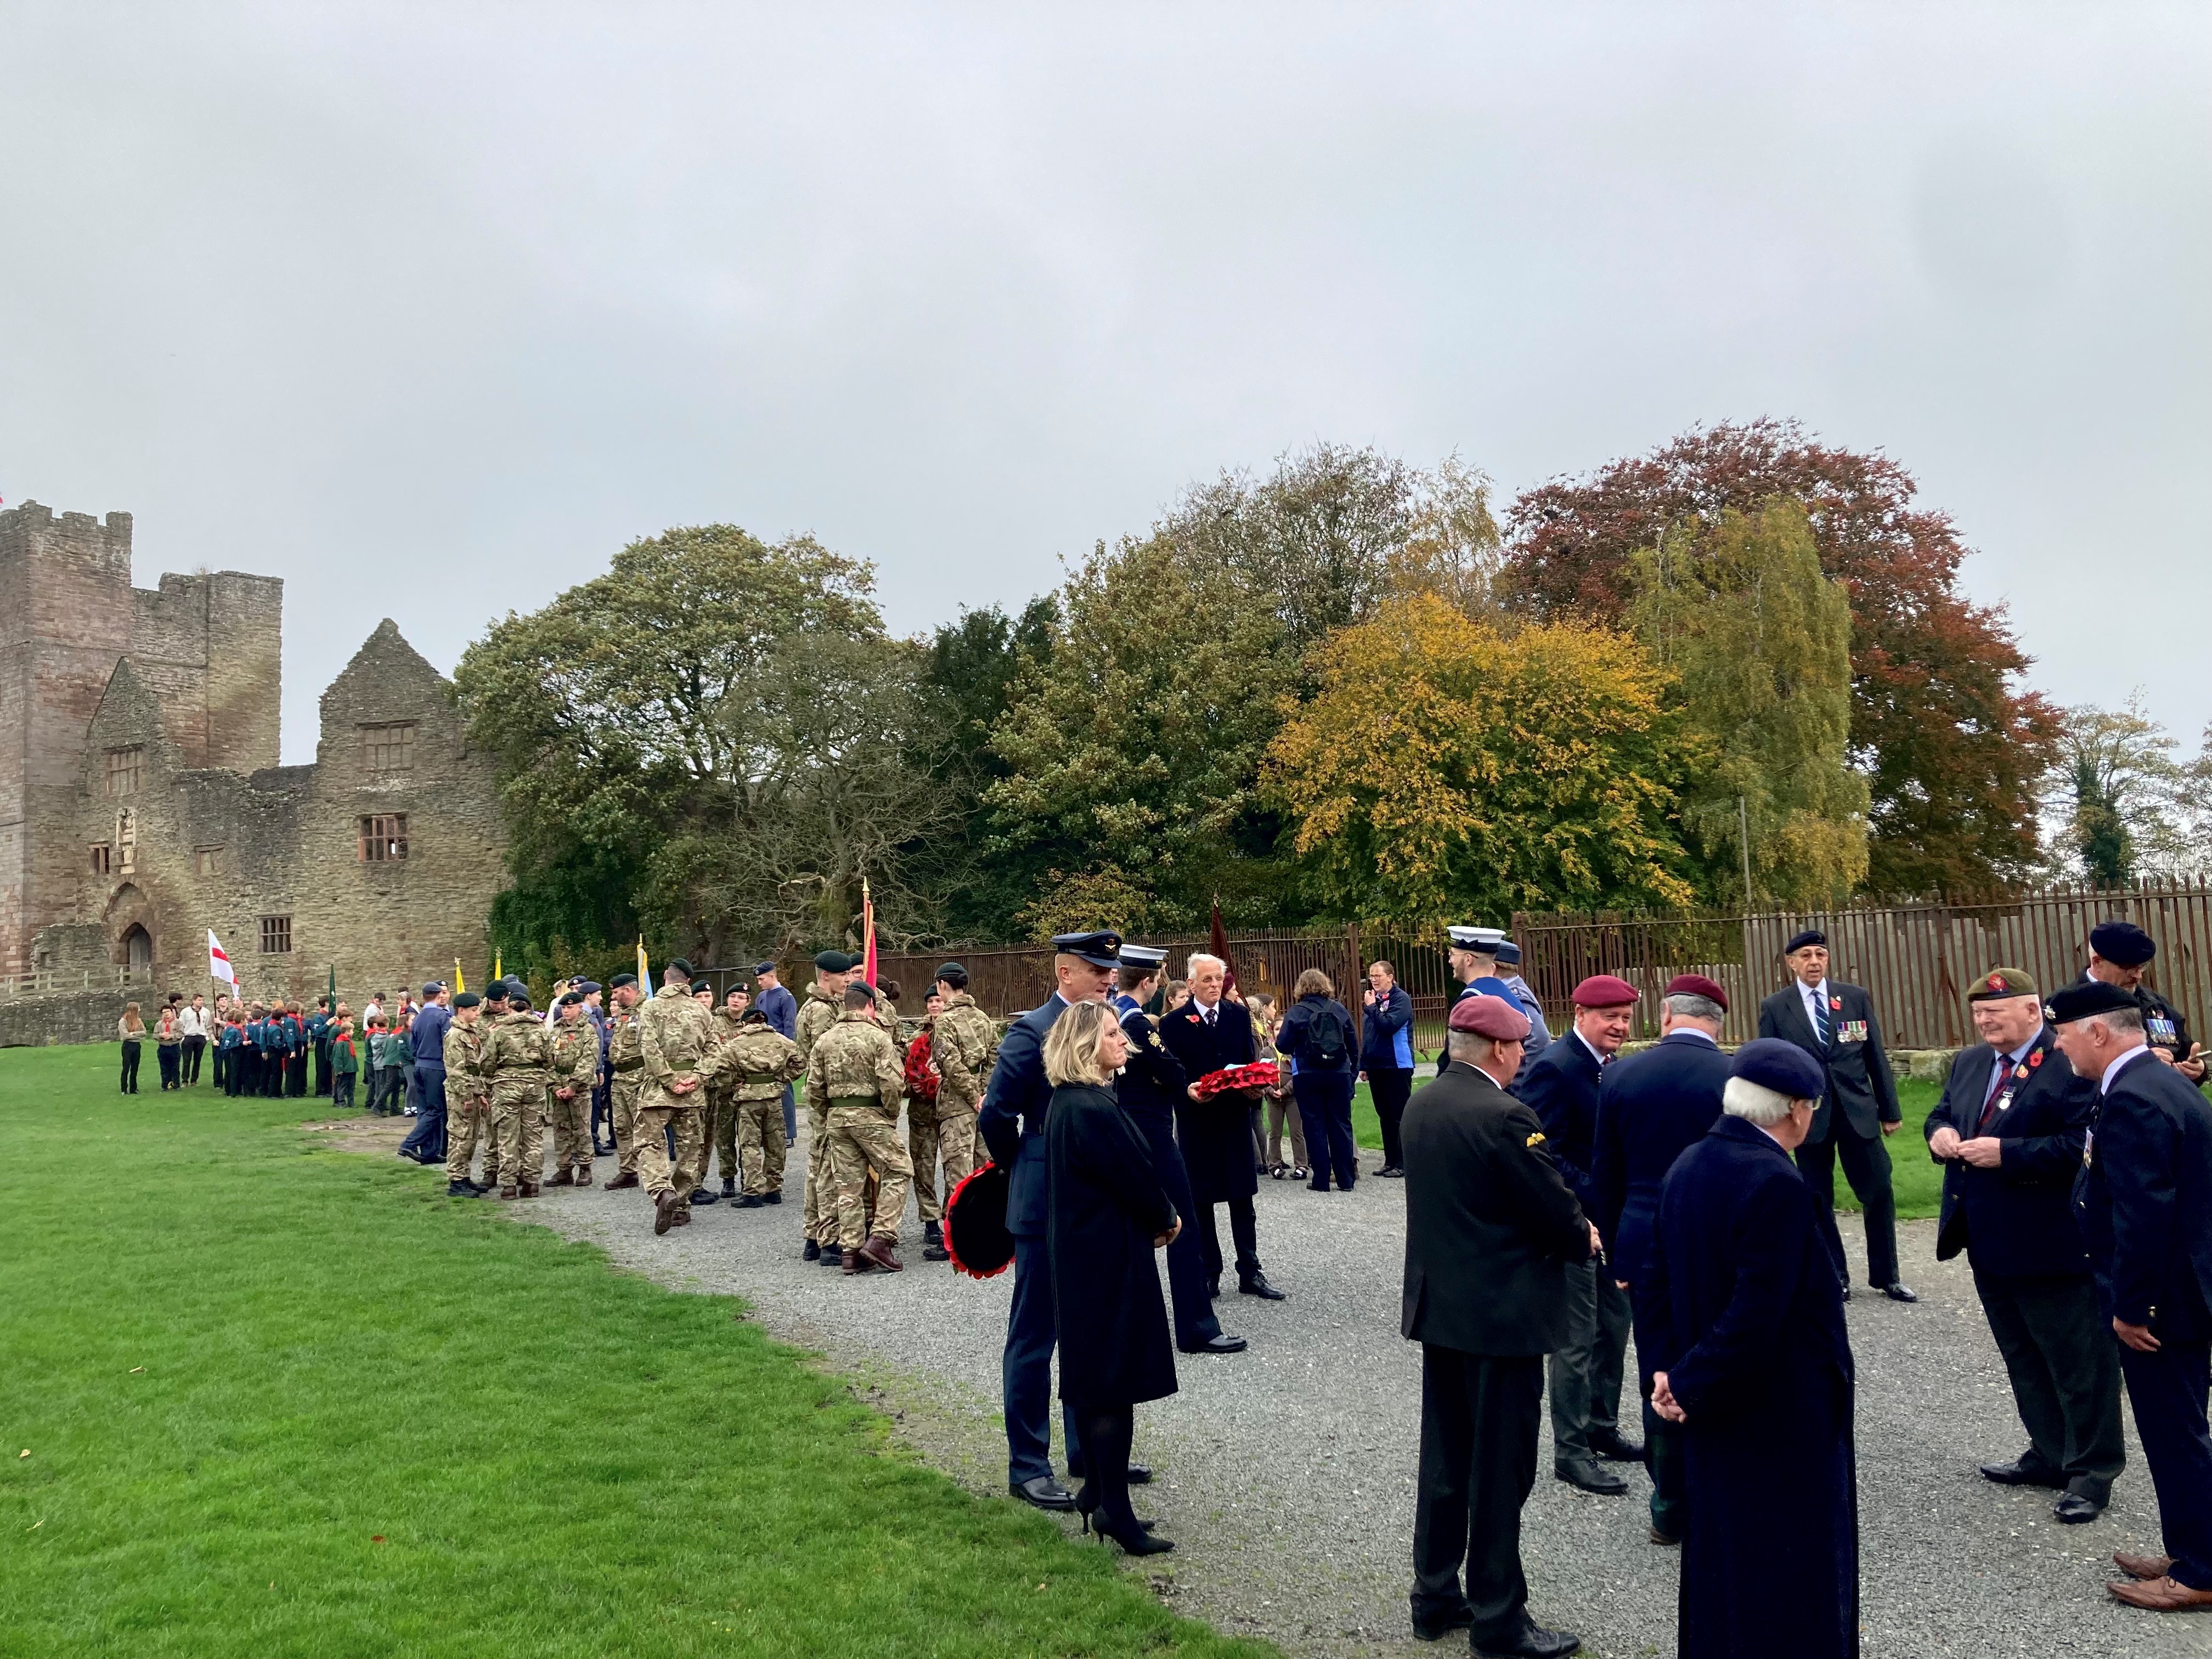 the parade of veterans and civic groups gather in the castle